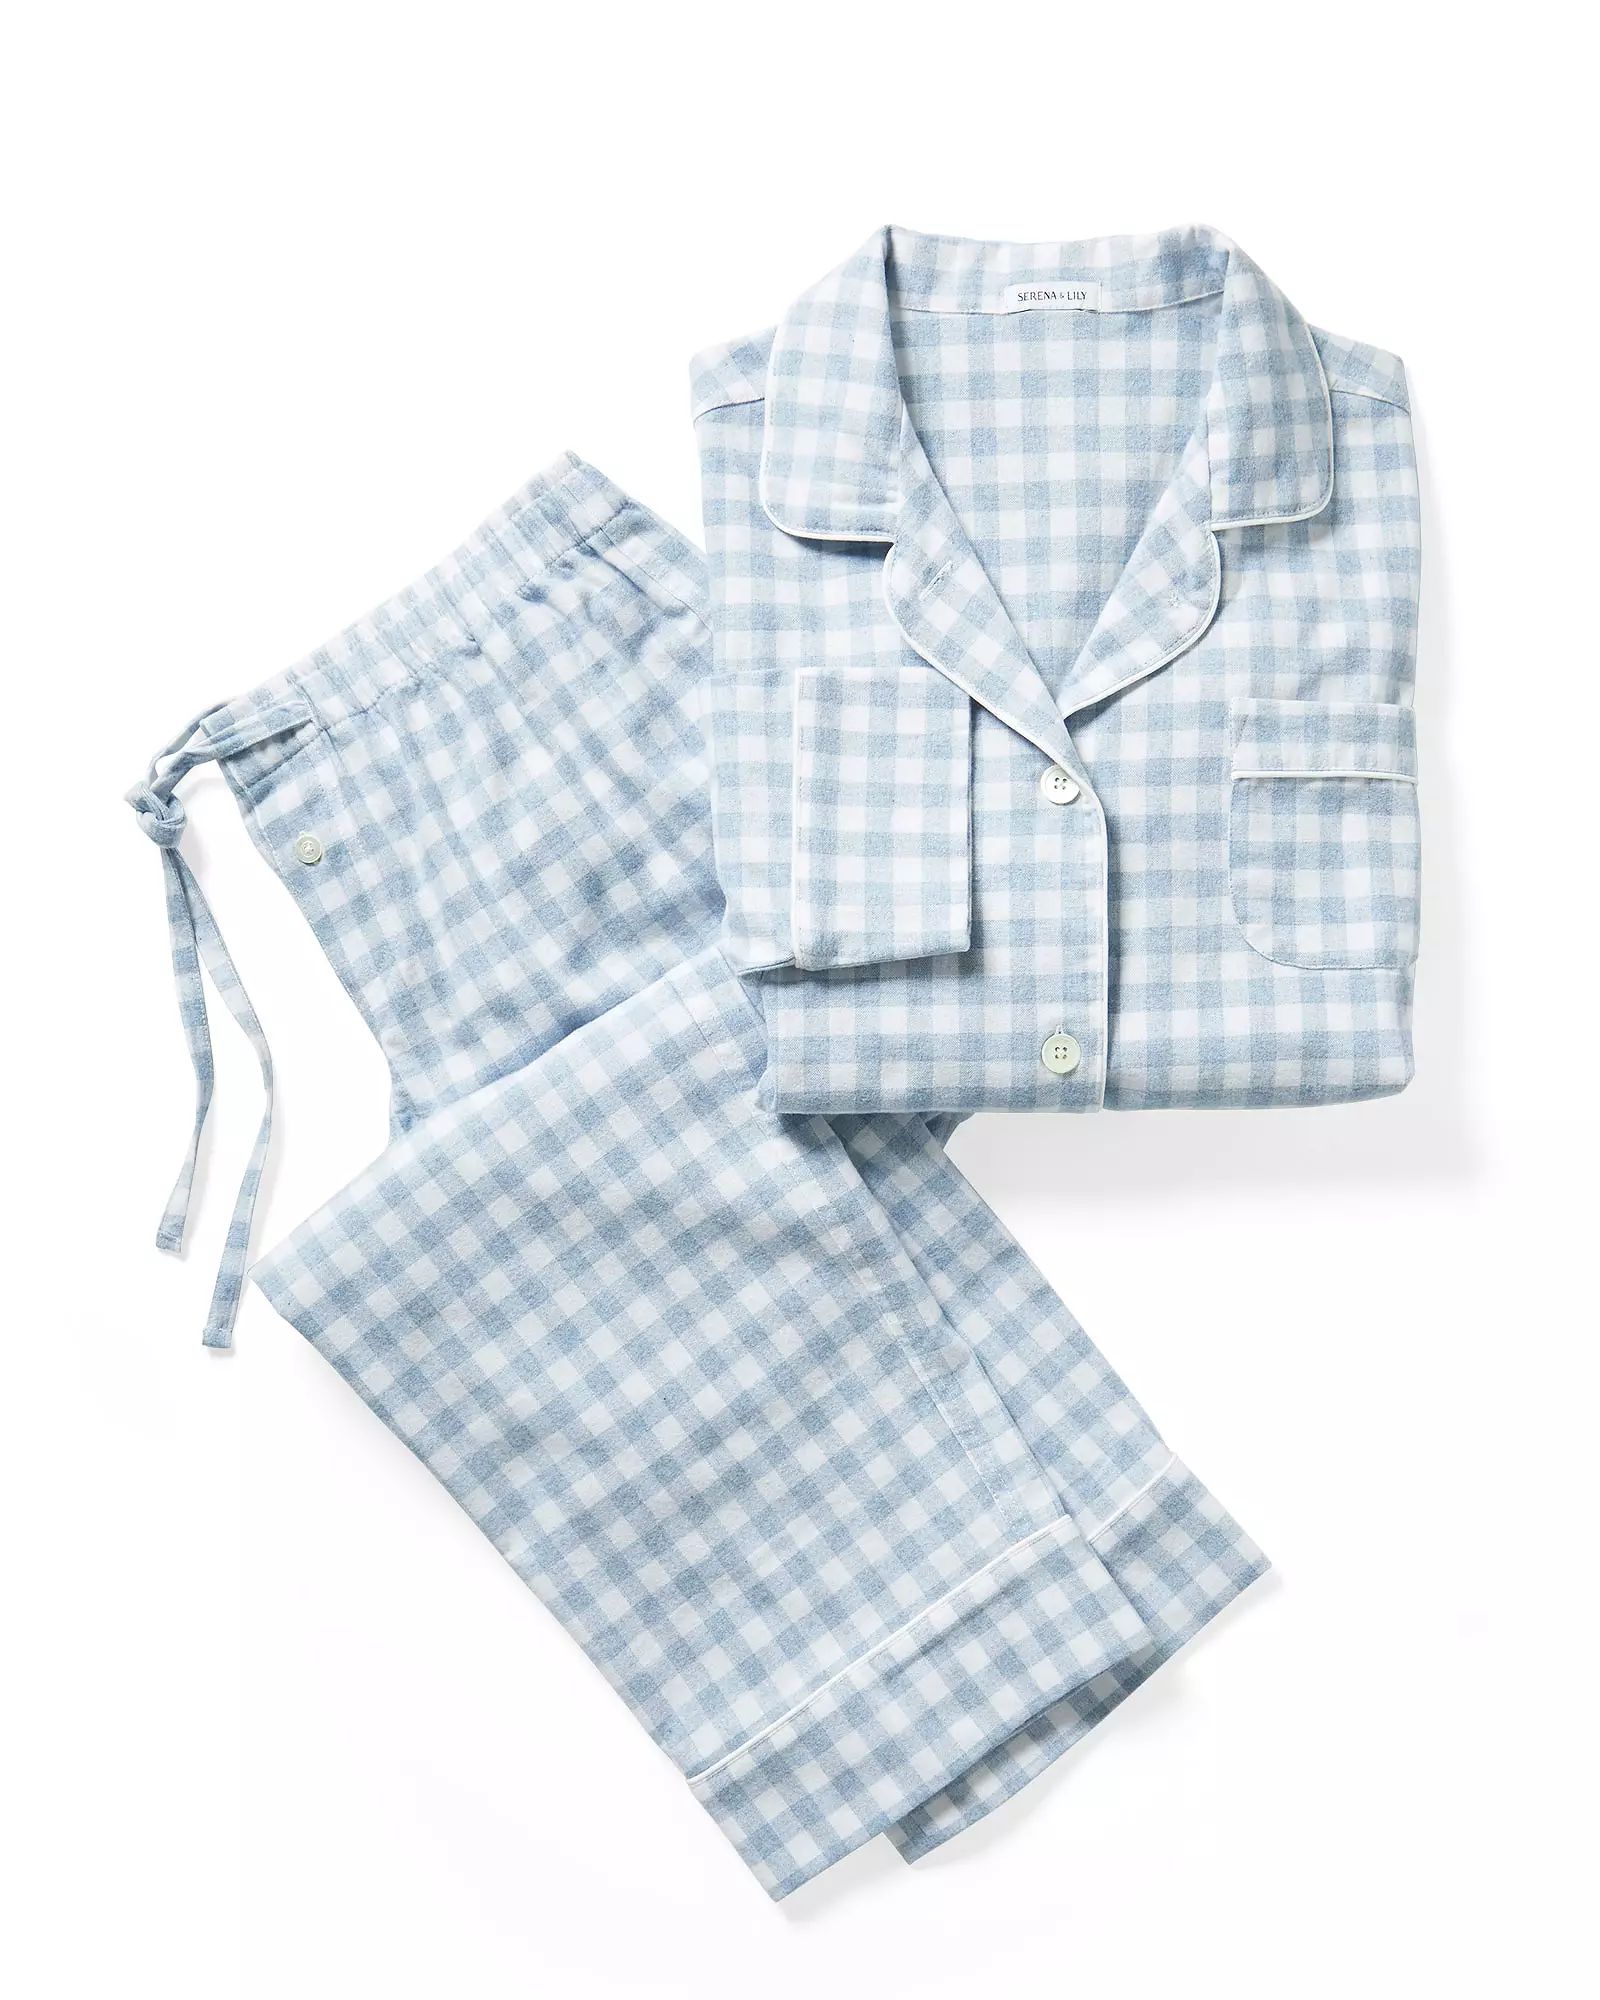 Belvedere Flannel Pajamas | Serena and Lily